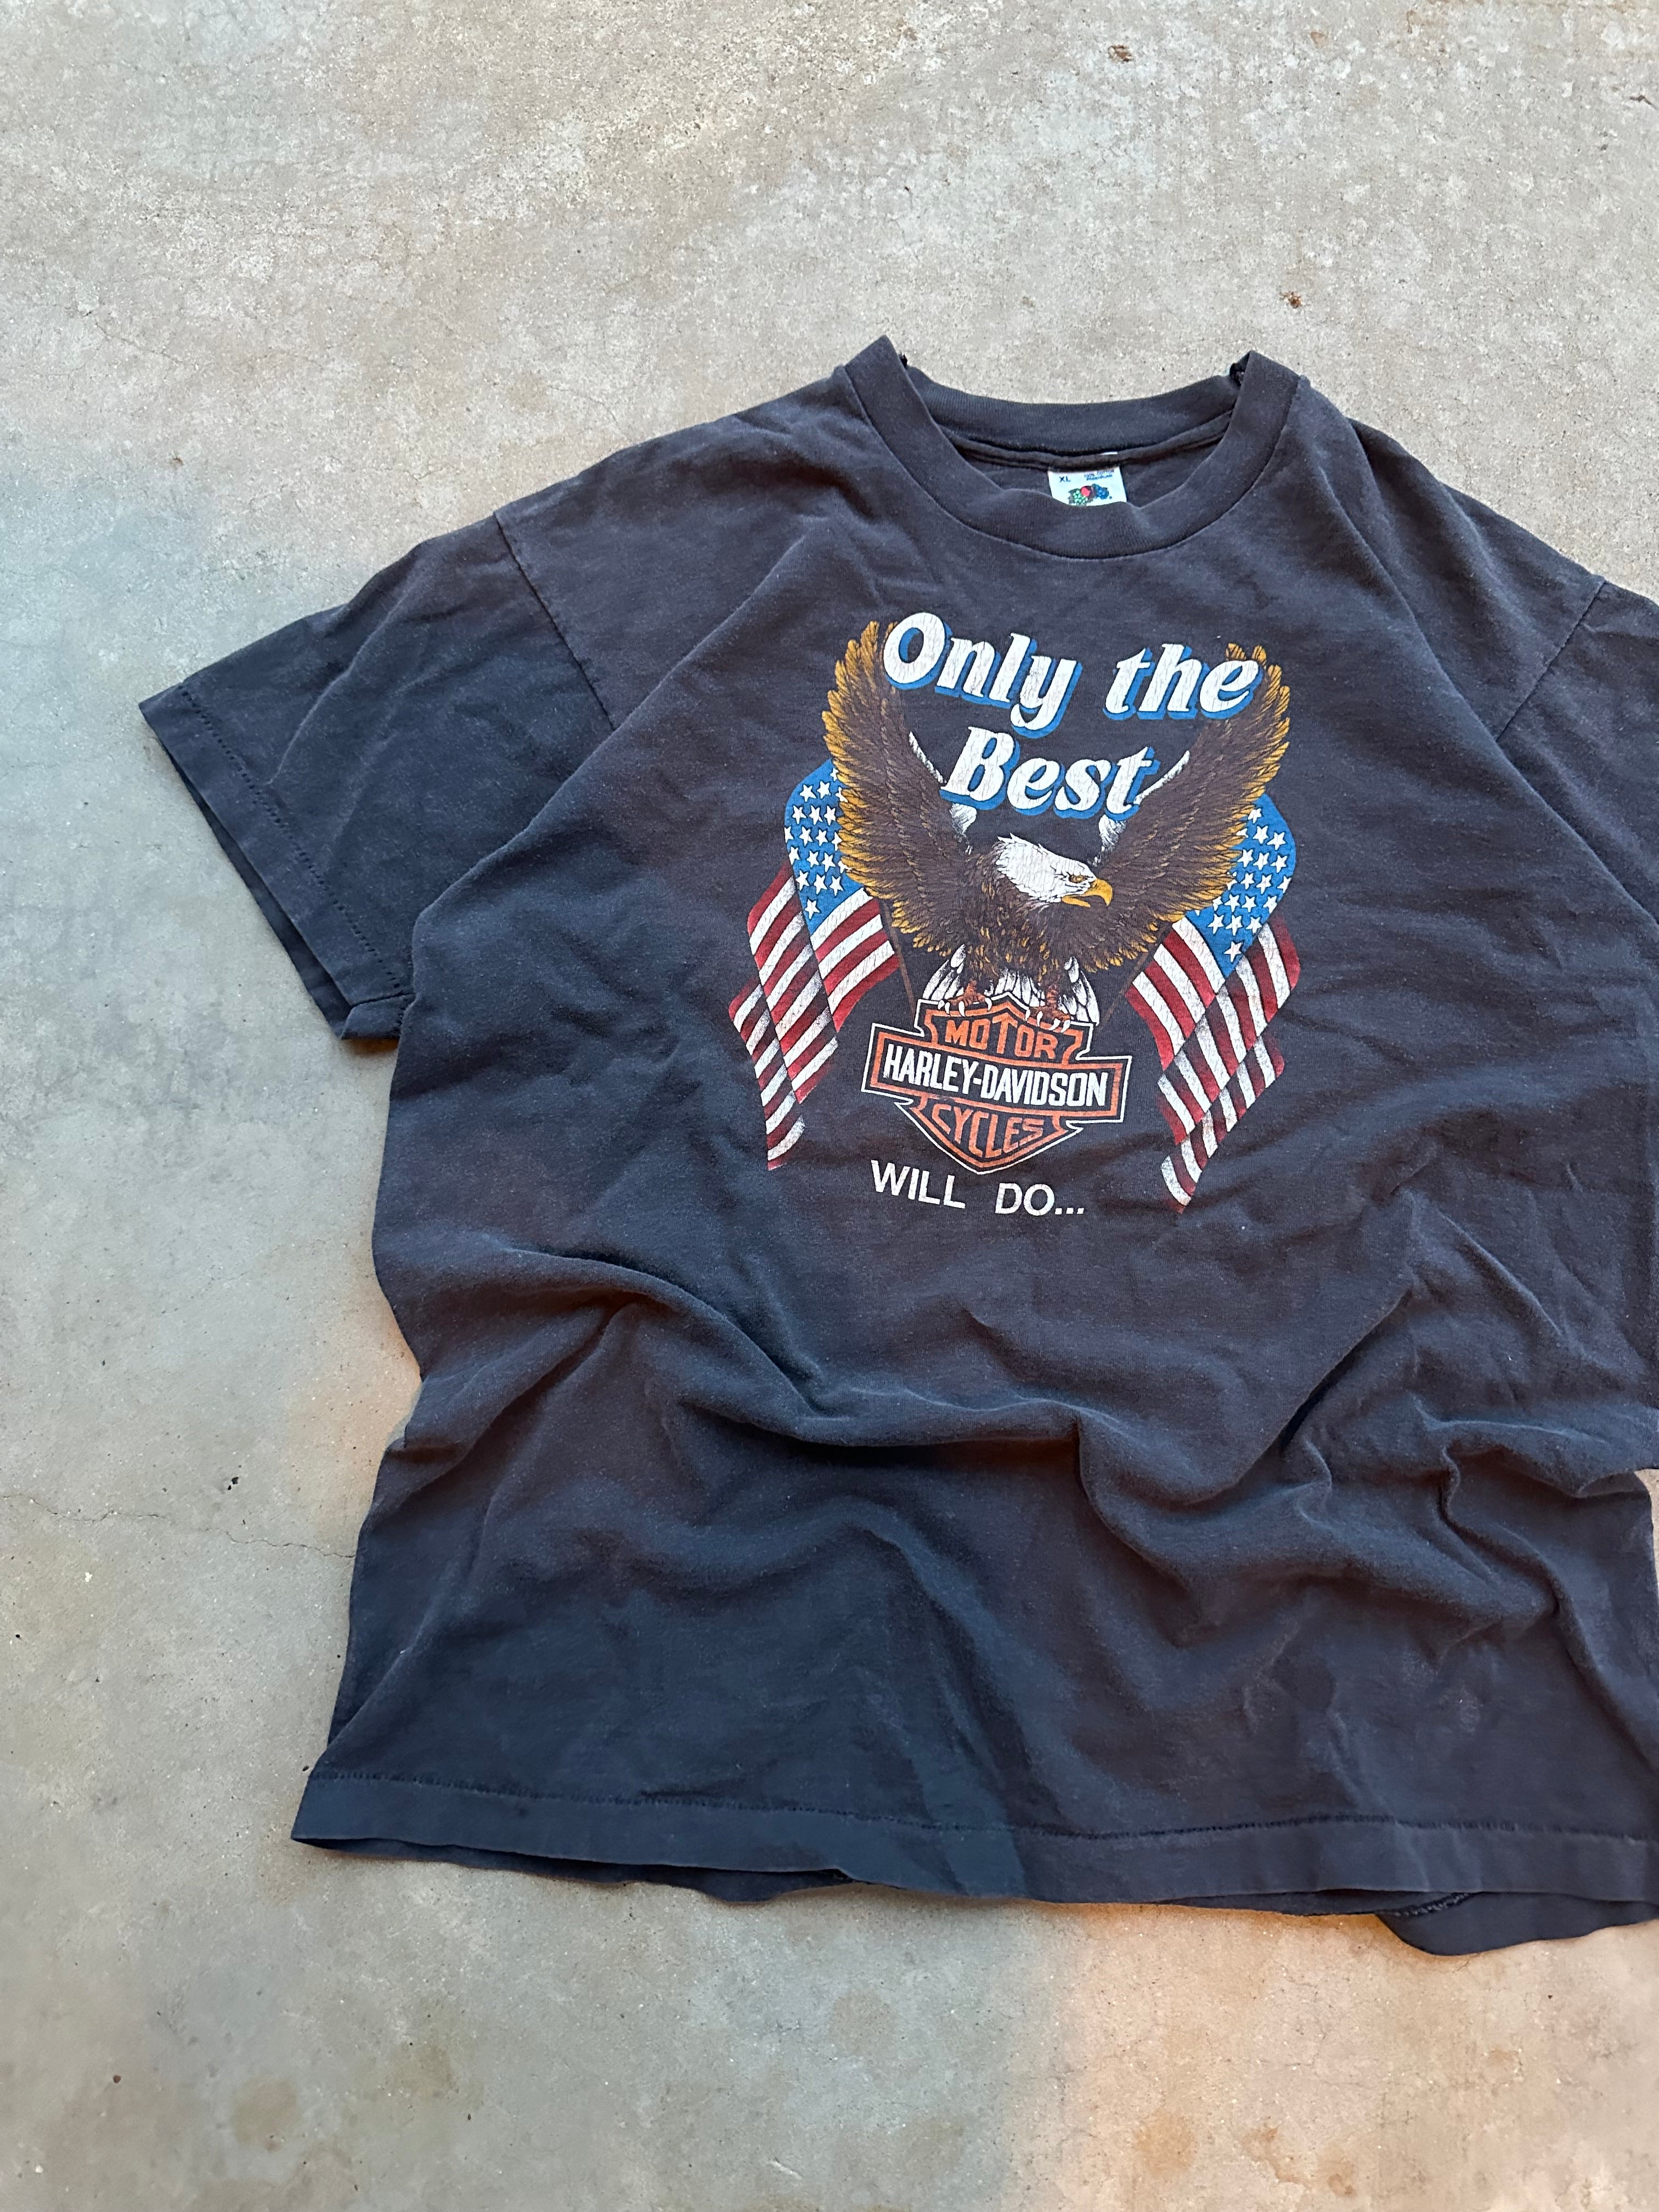 1987 Harley Davidson “Only the Best” T-Shirt (XL)